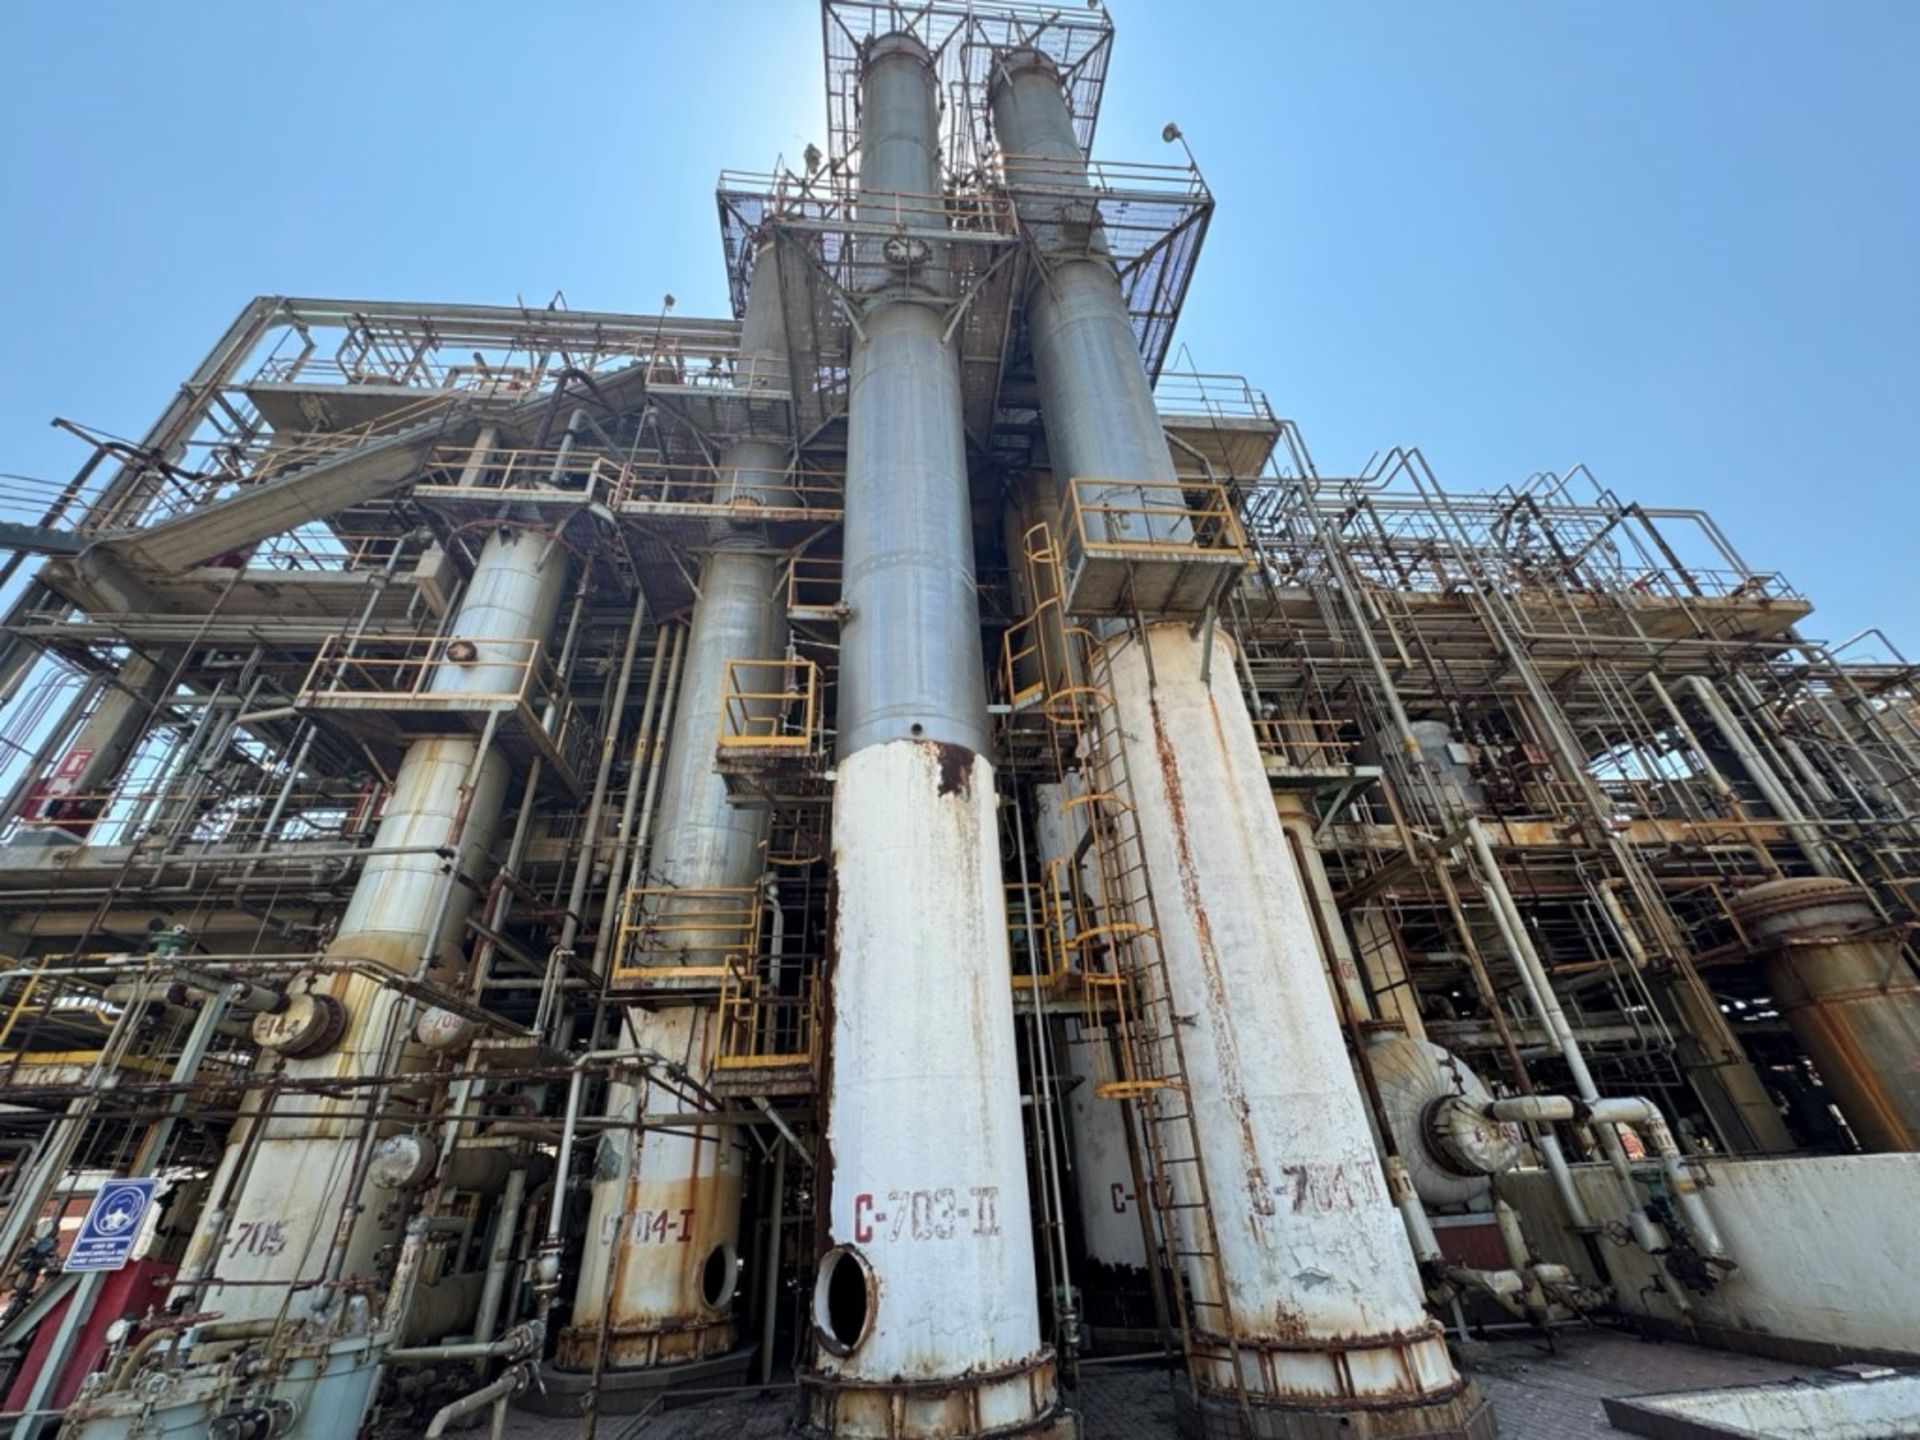 Complete industrial plant for chemical process, with capacity to produce 85,000 tons/year of Caprol - Image 37 of 86